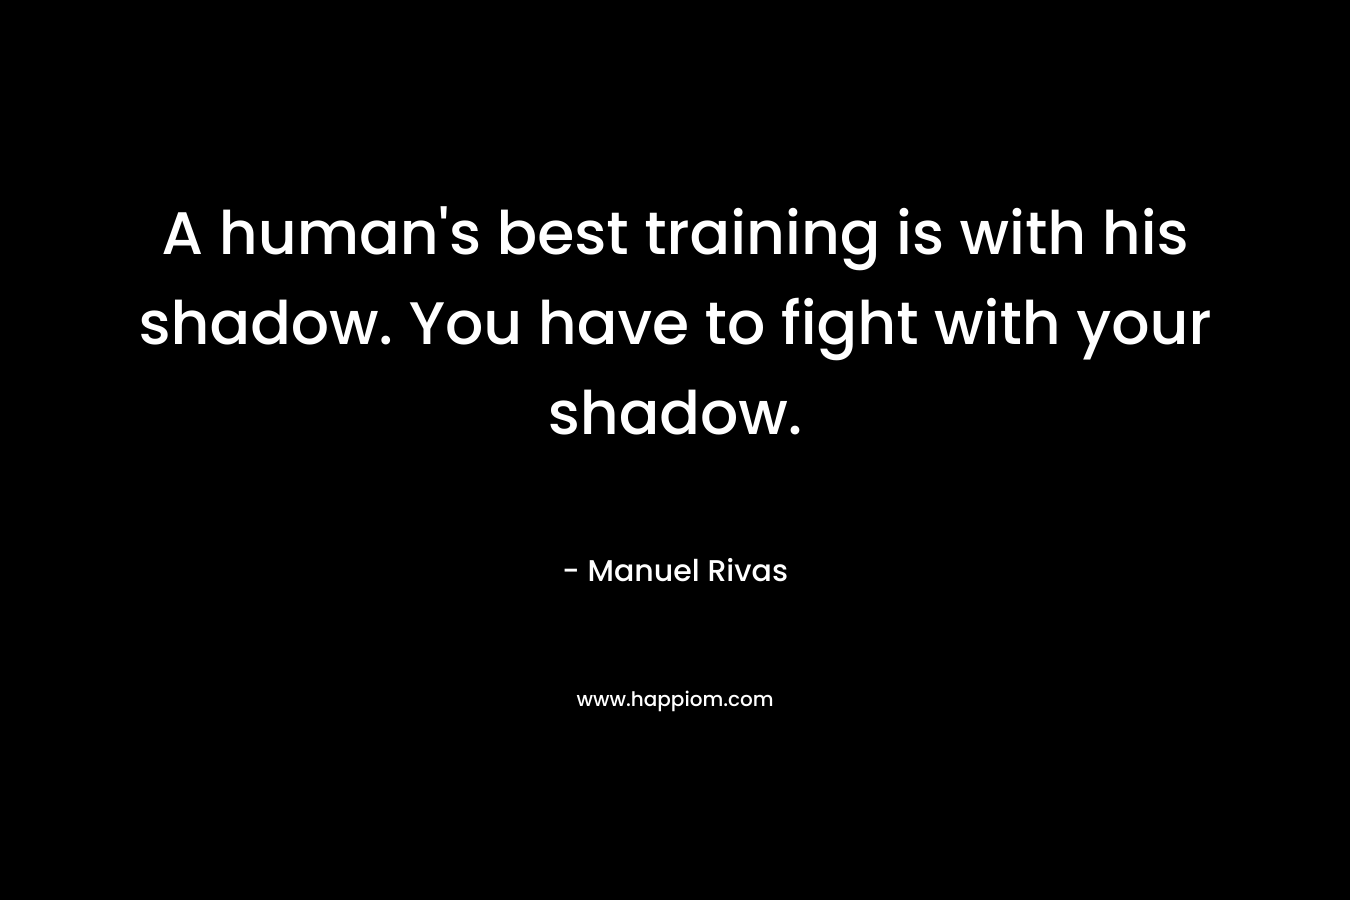 A human's best training is with his shadow. You have to fight with your shadow.